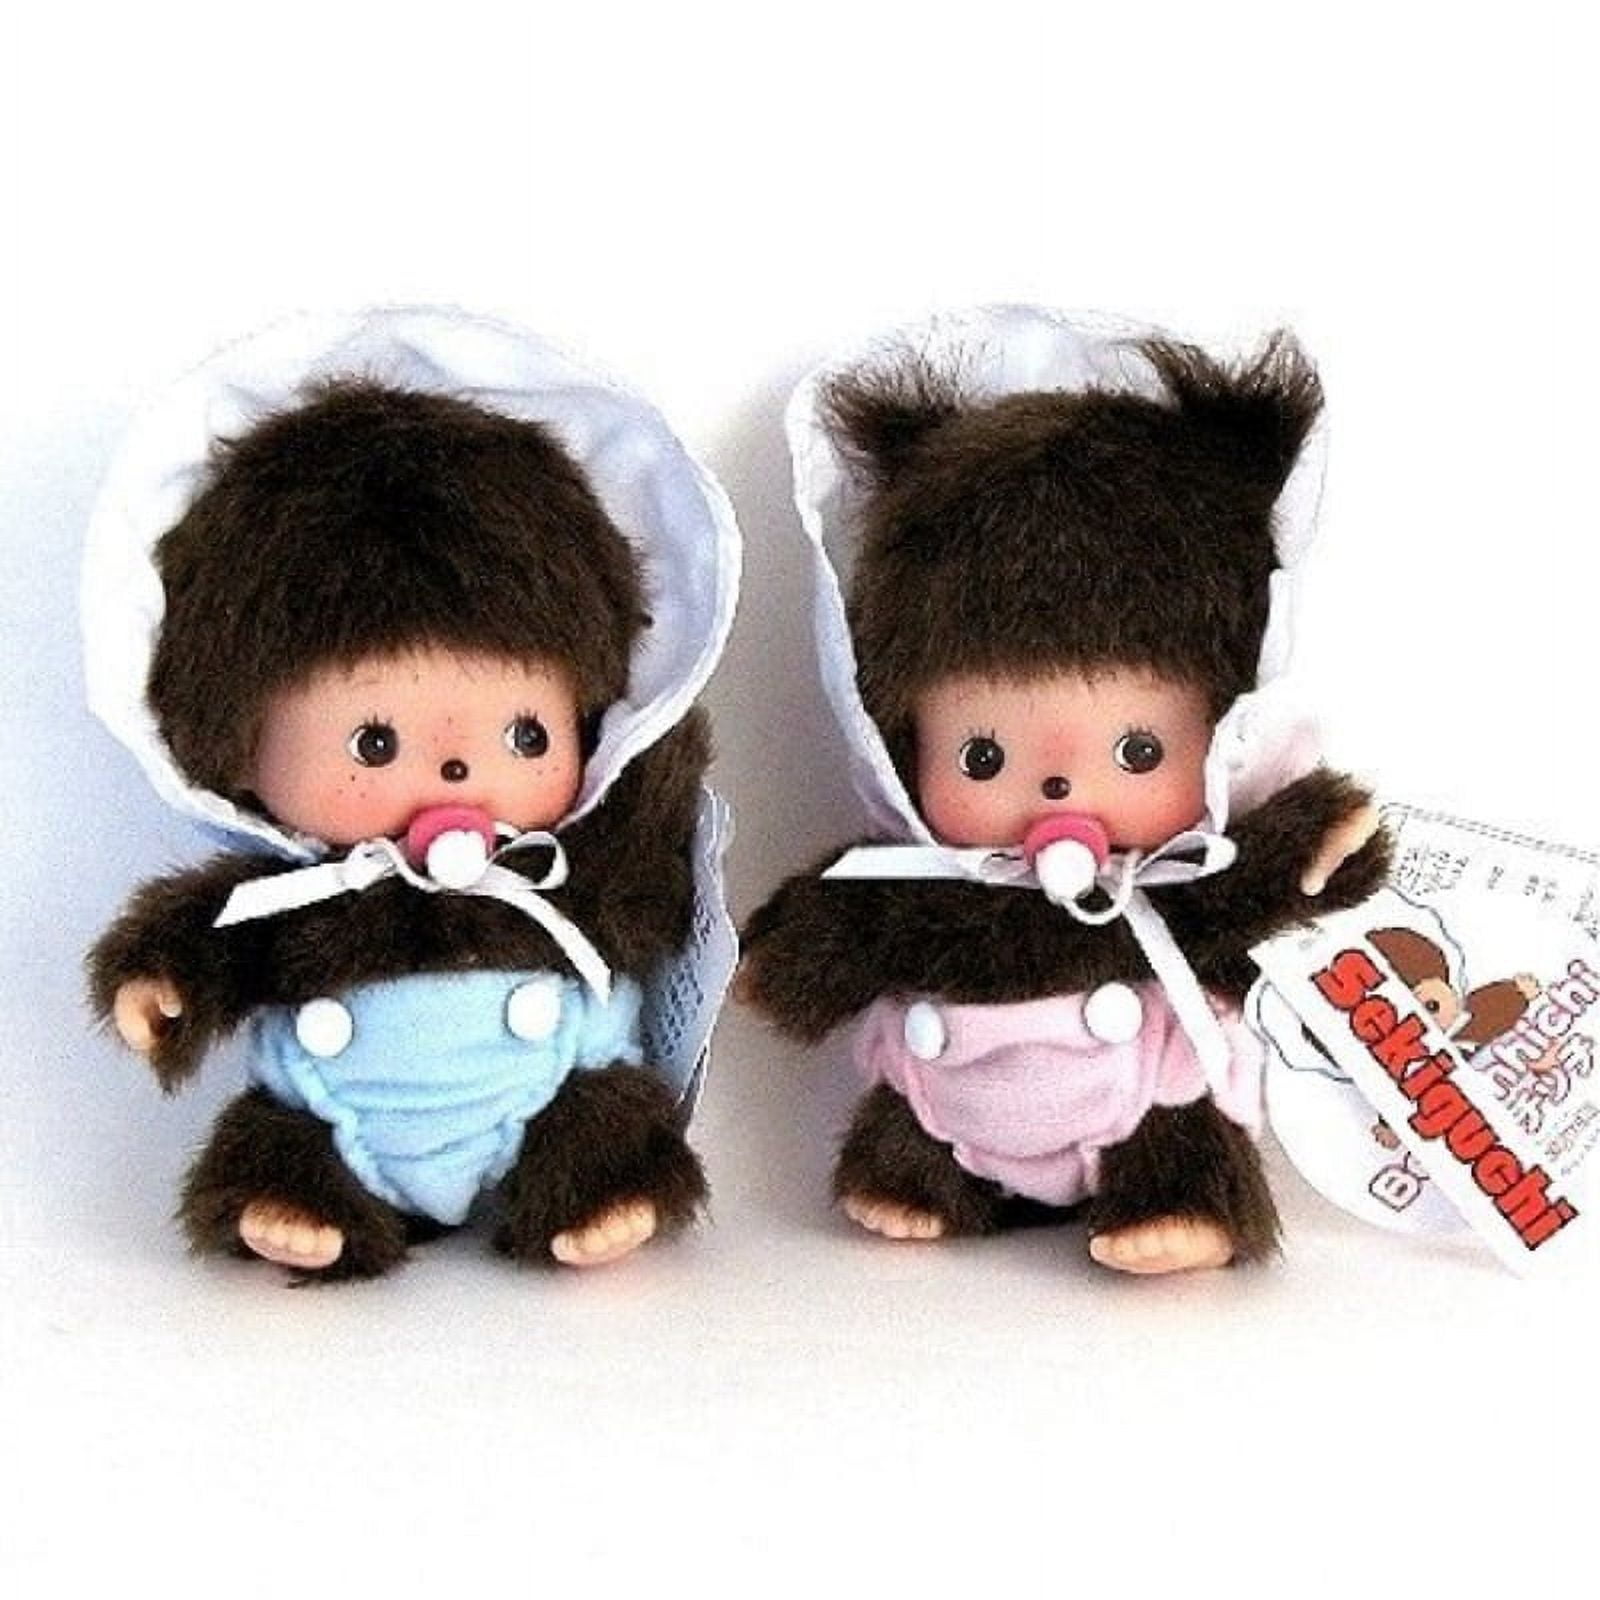 bruny roman recommends munch chi chi dolls pic